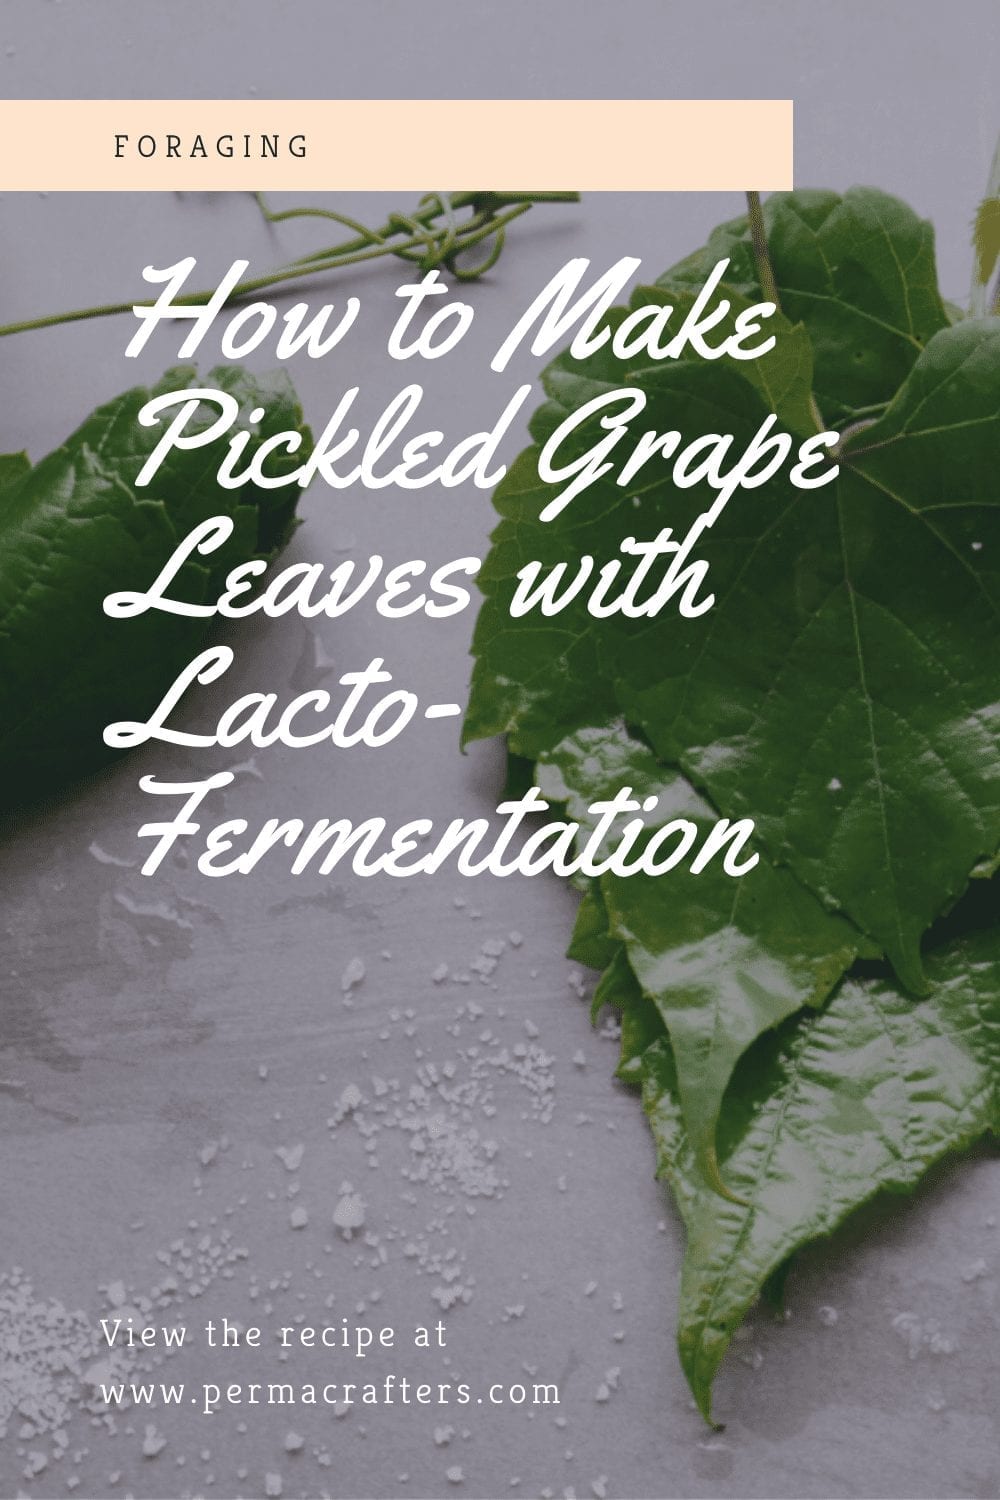 How to Make Pickled Grape Leaves with Lacto-Fermentation